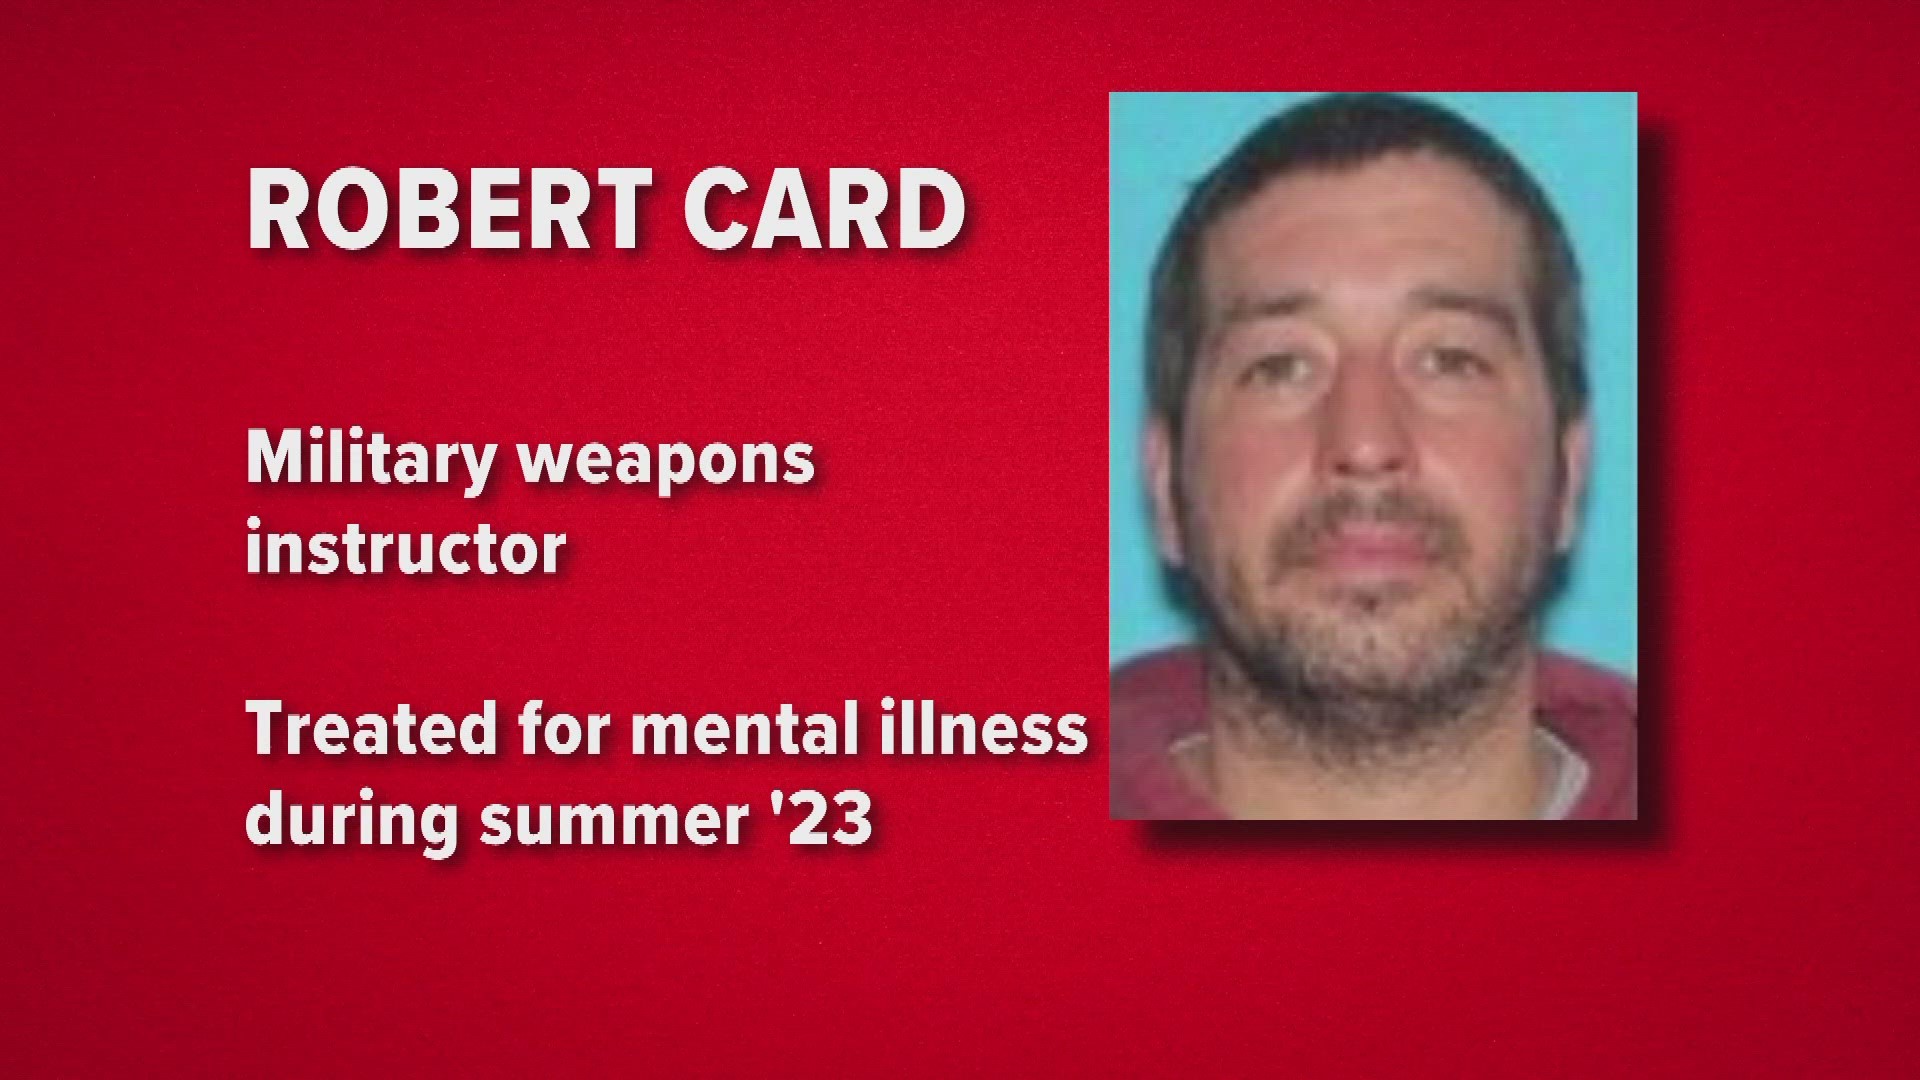 Here's what we know about the suspected gunman in the Maine mass shootings that claimed the lives of 18 people and injured another 13.